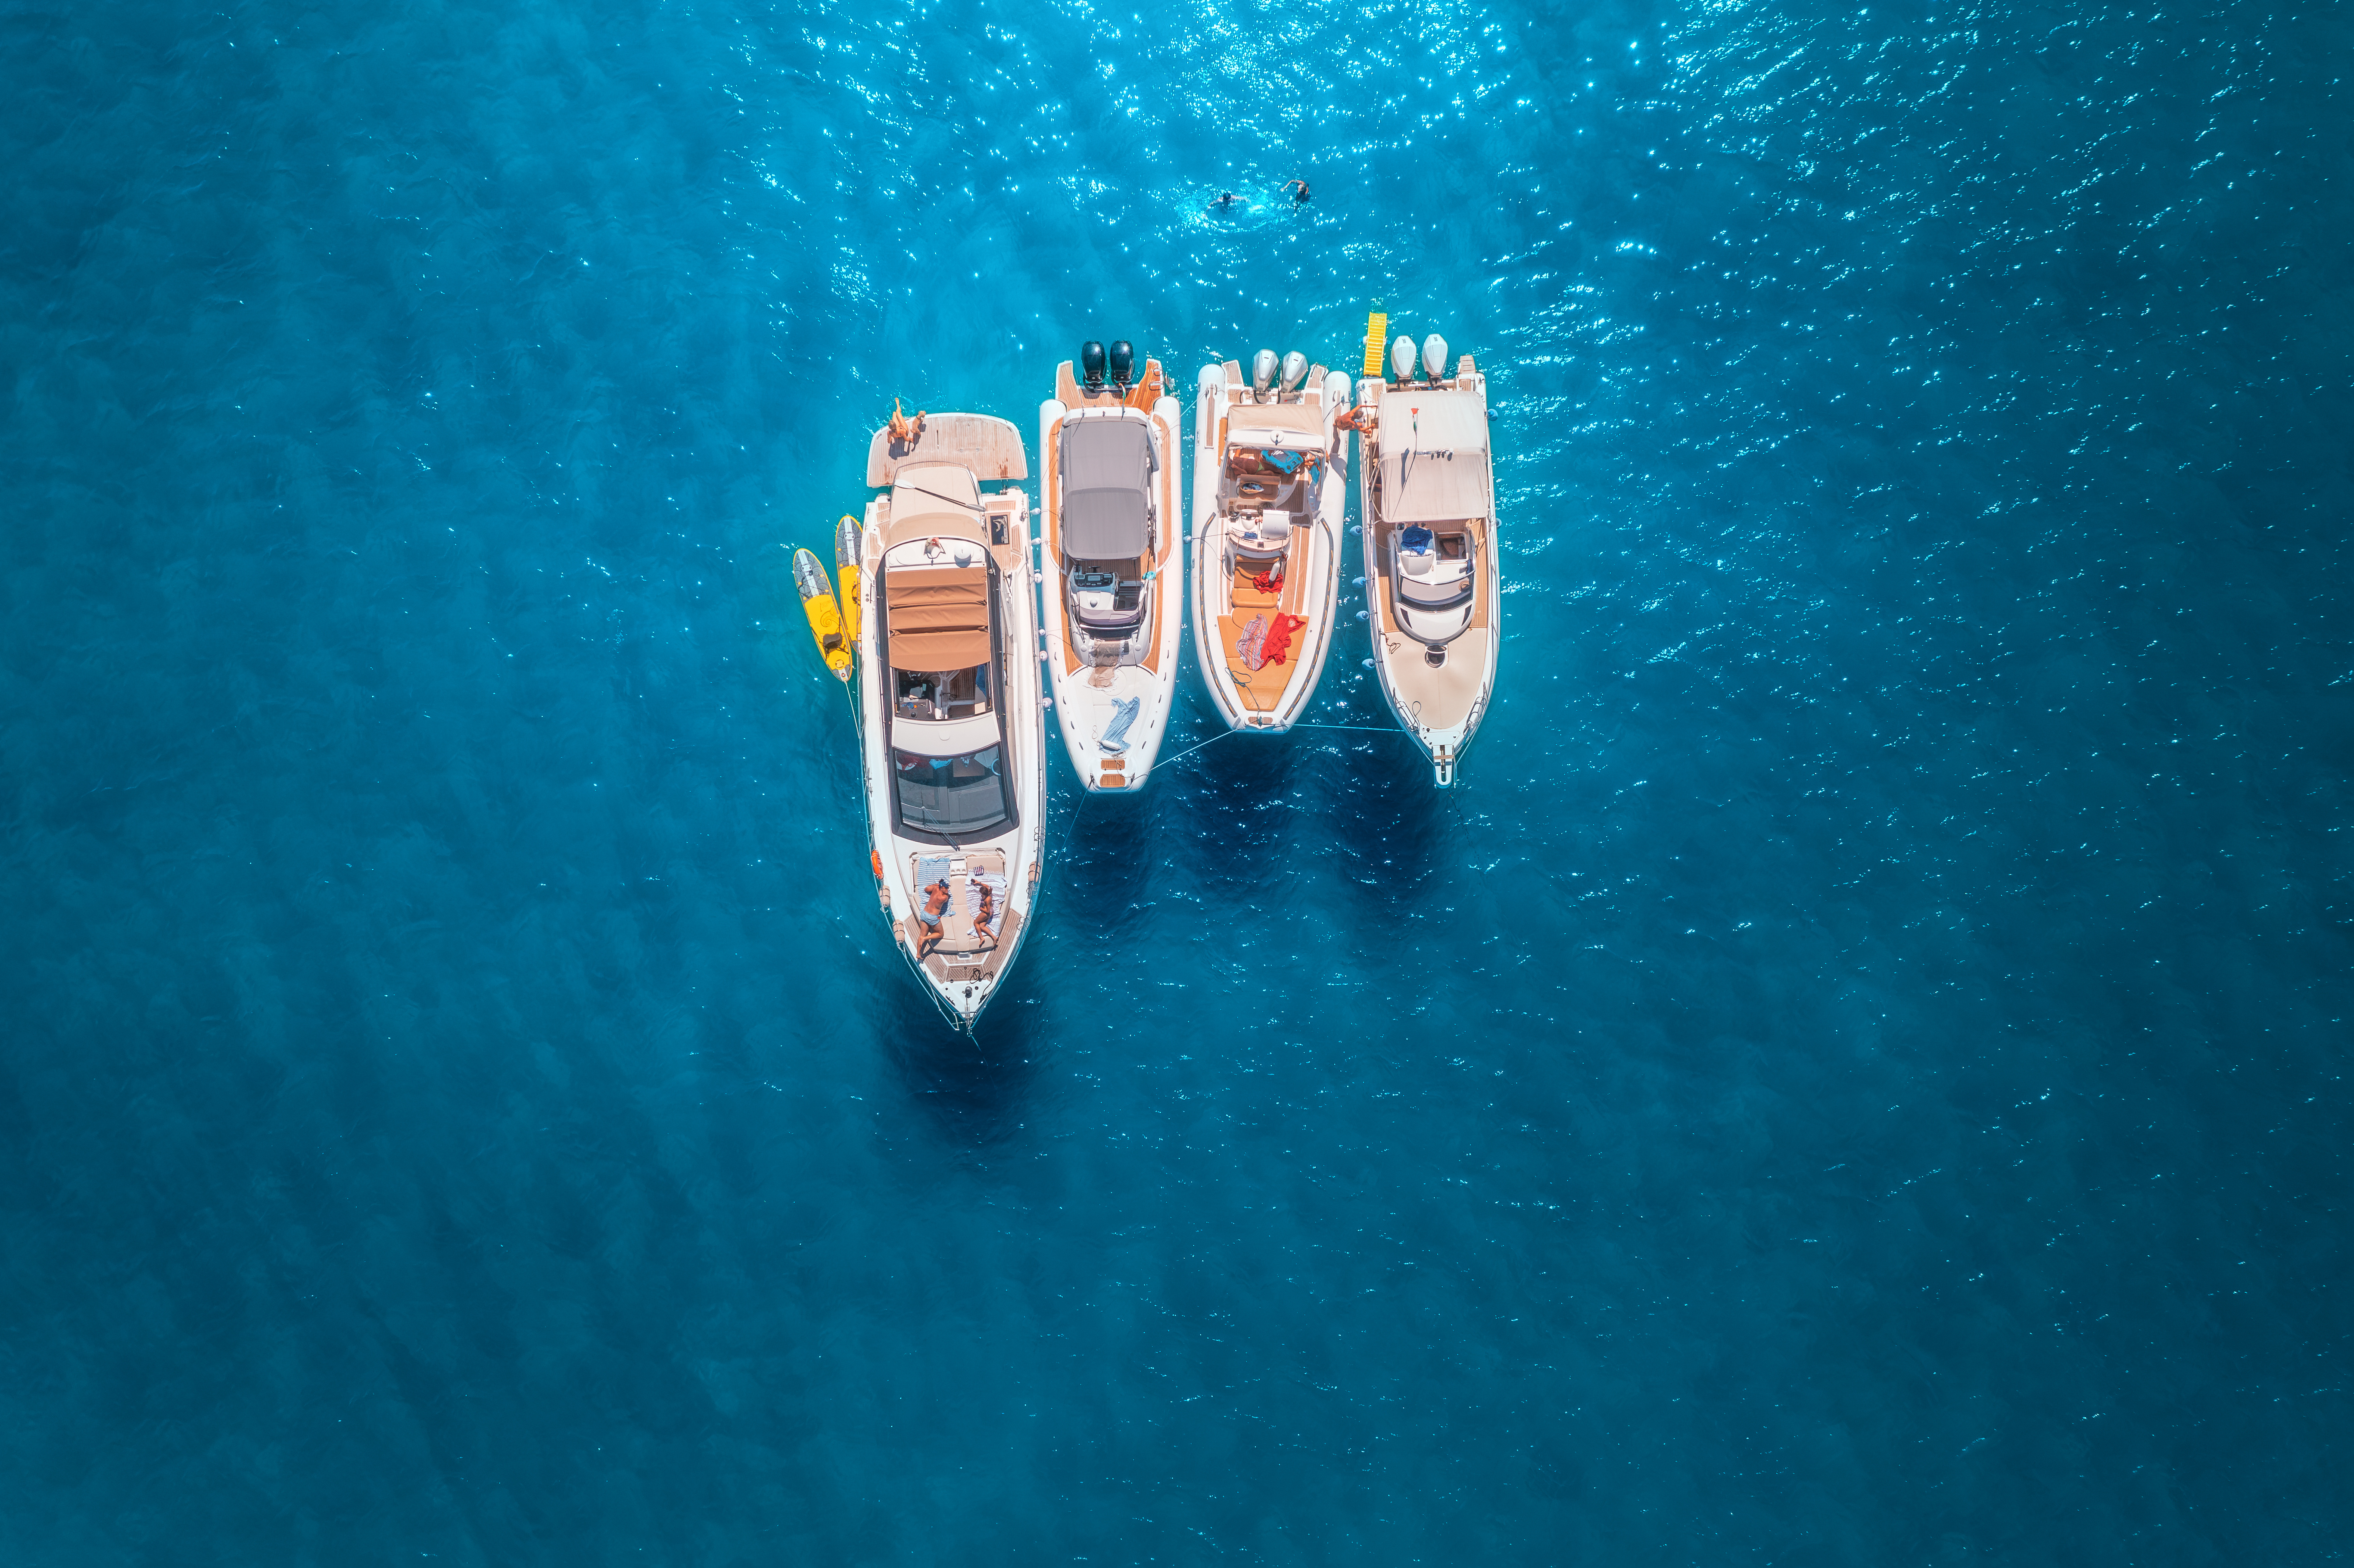 Size Selection when it comes to Boats? Check out these Top Small Speedboats